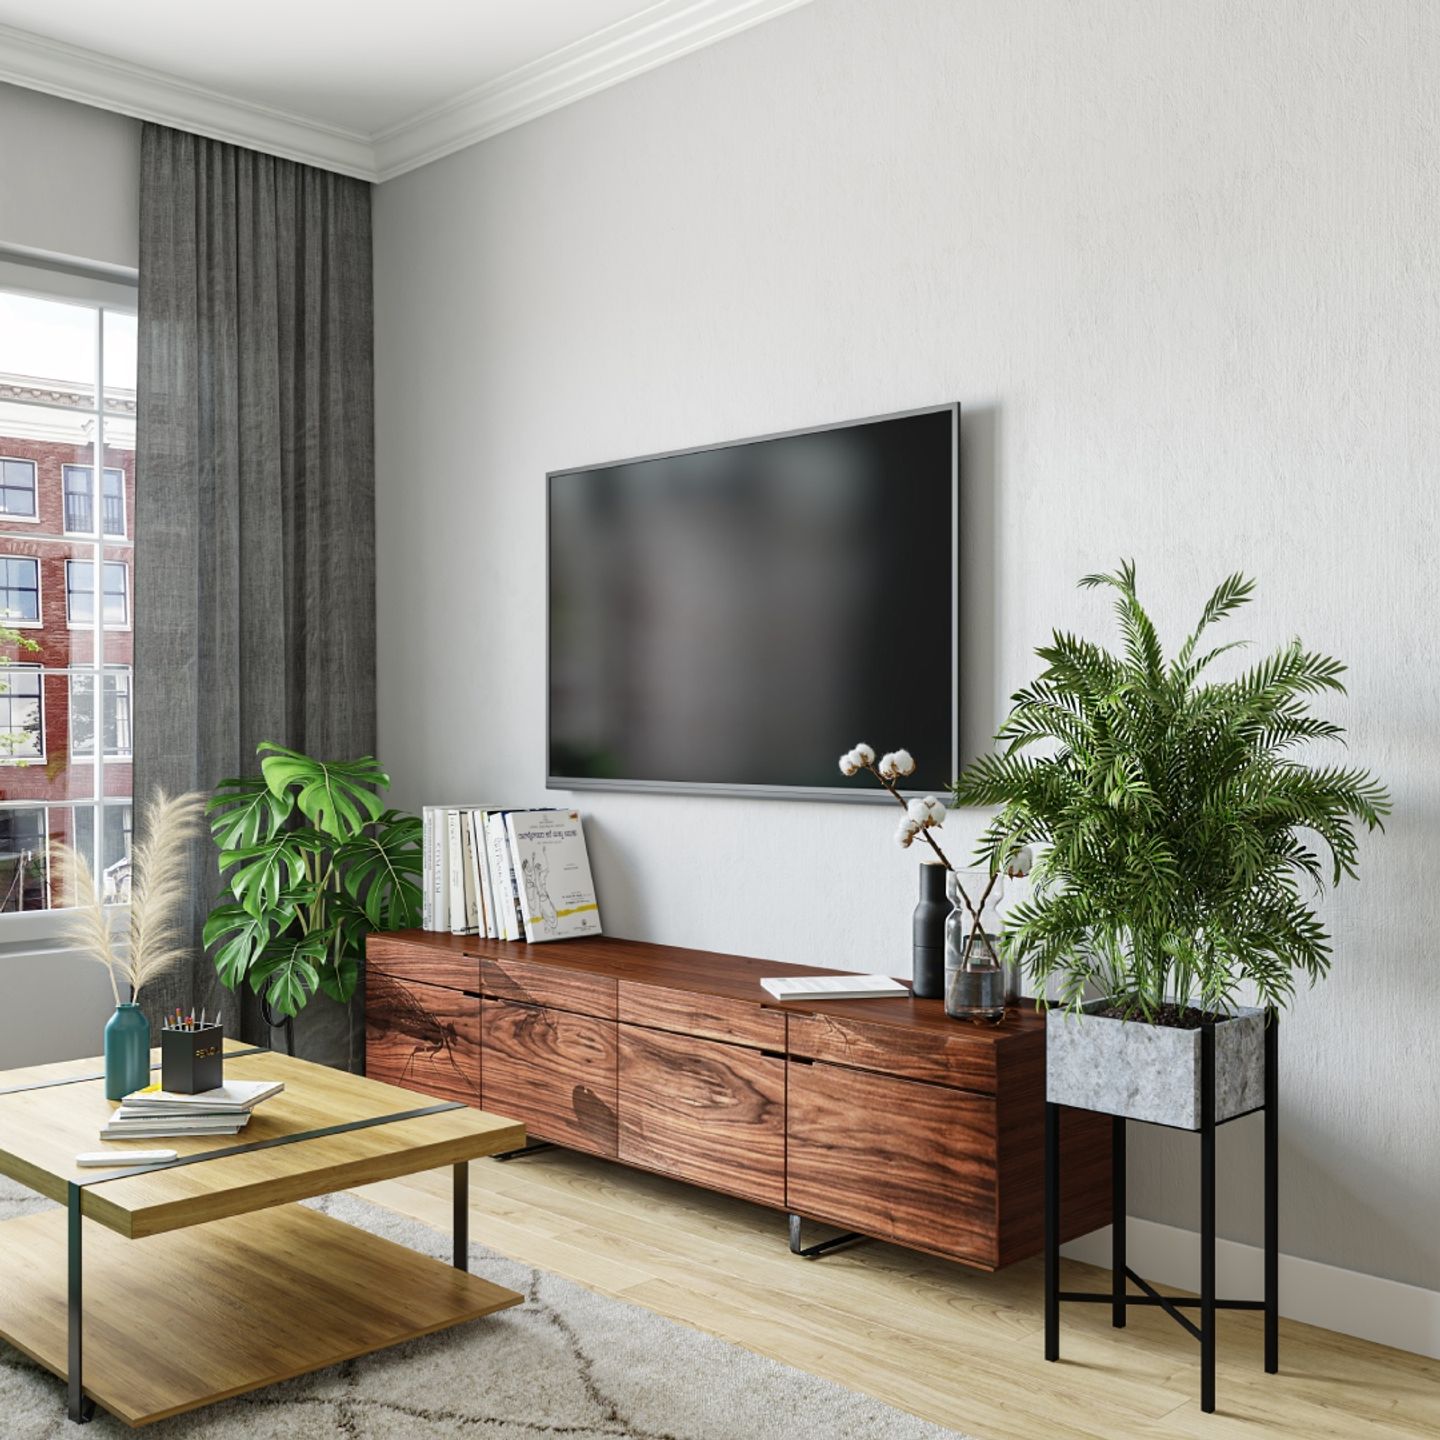 Brown Wooden TV Unit Design With Drawers - Livspace